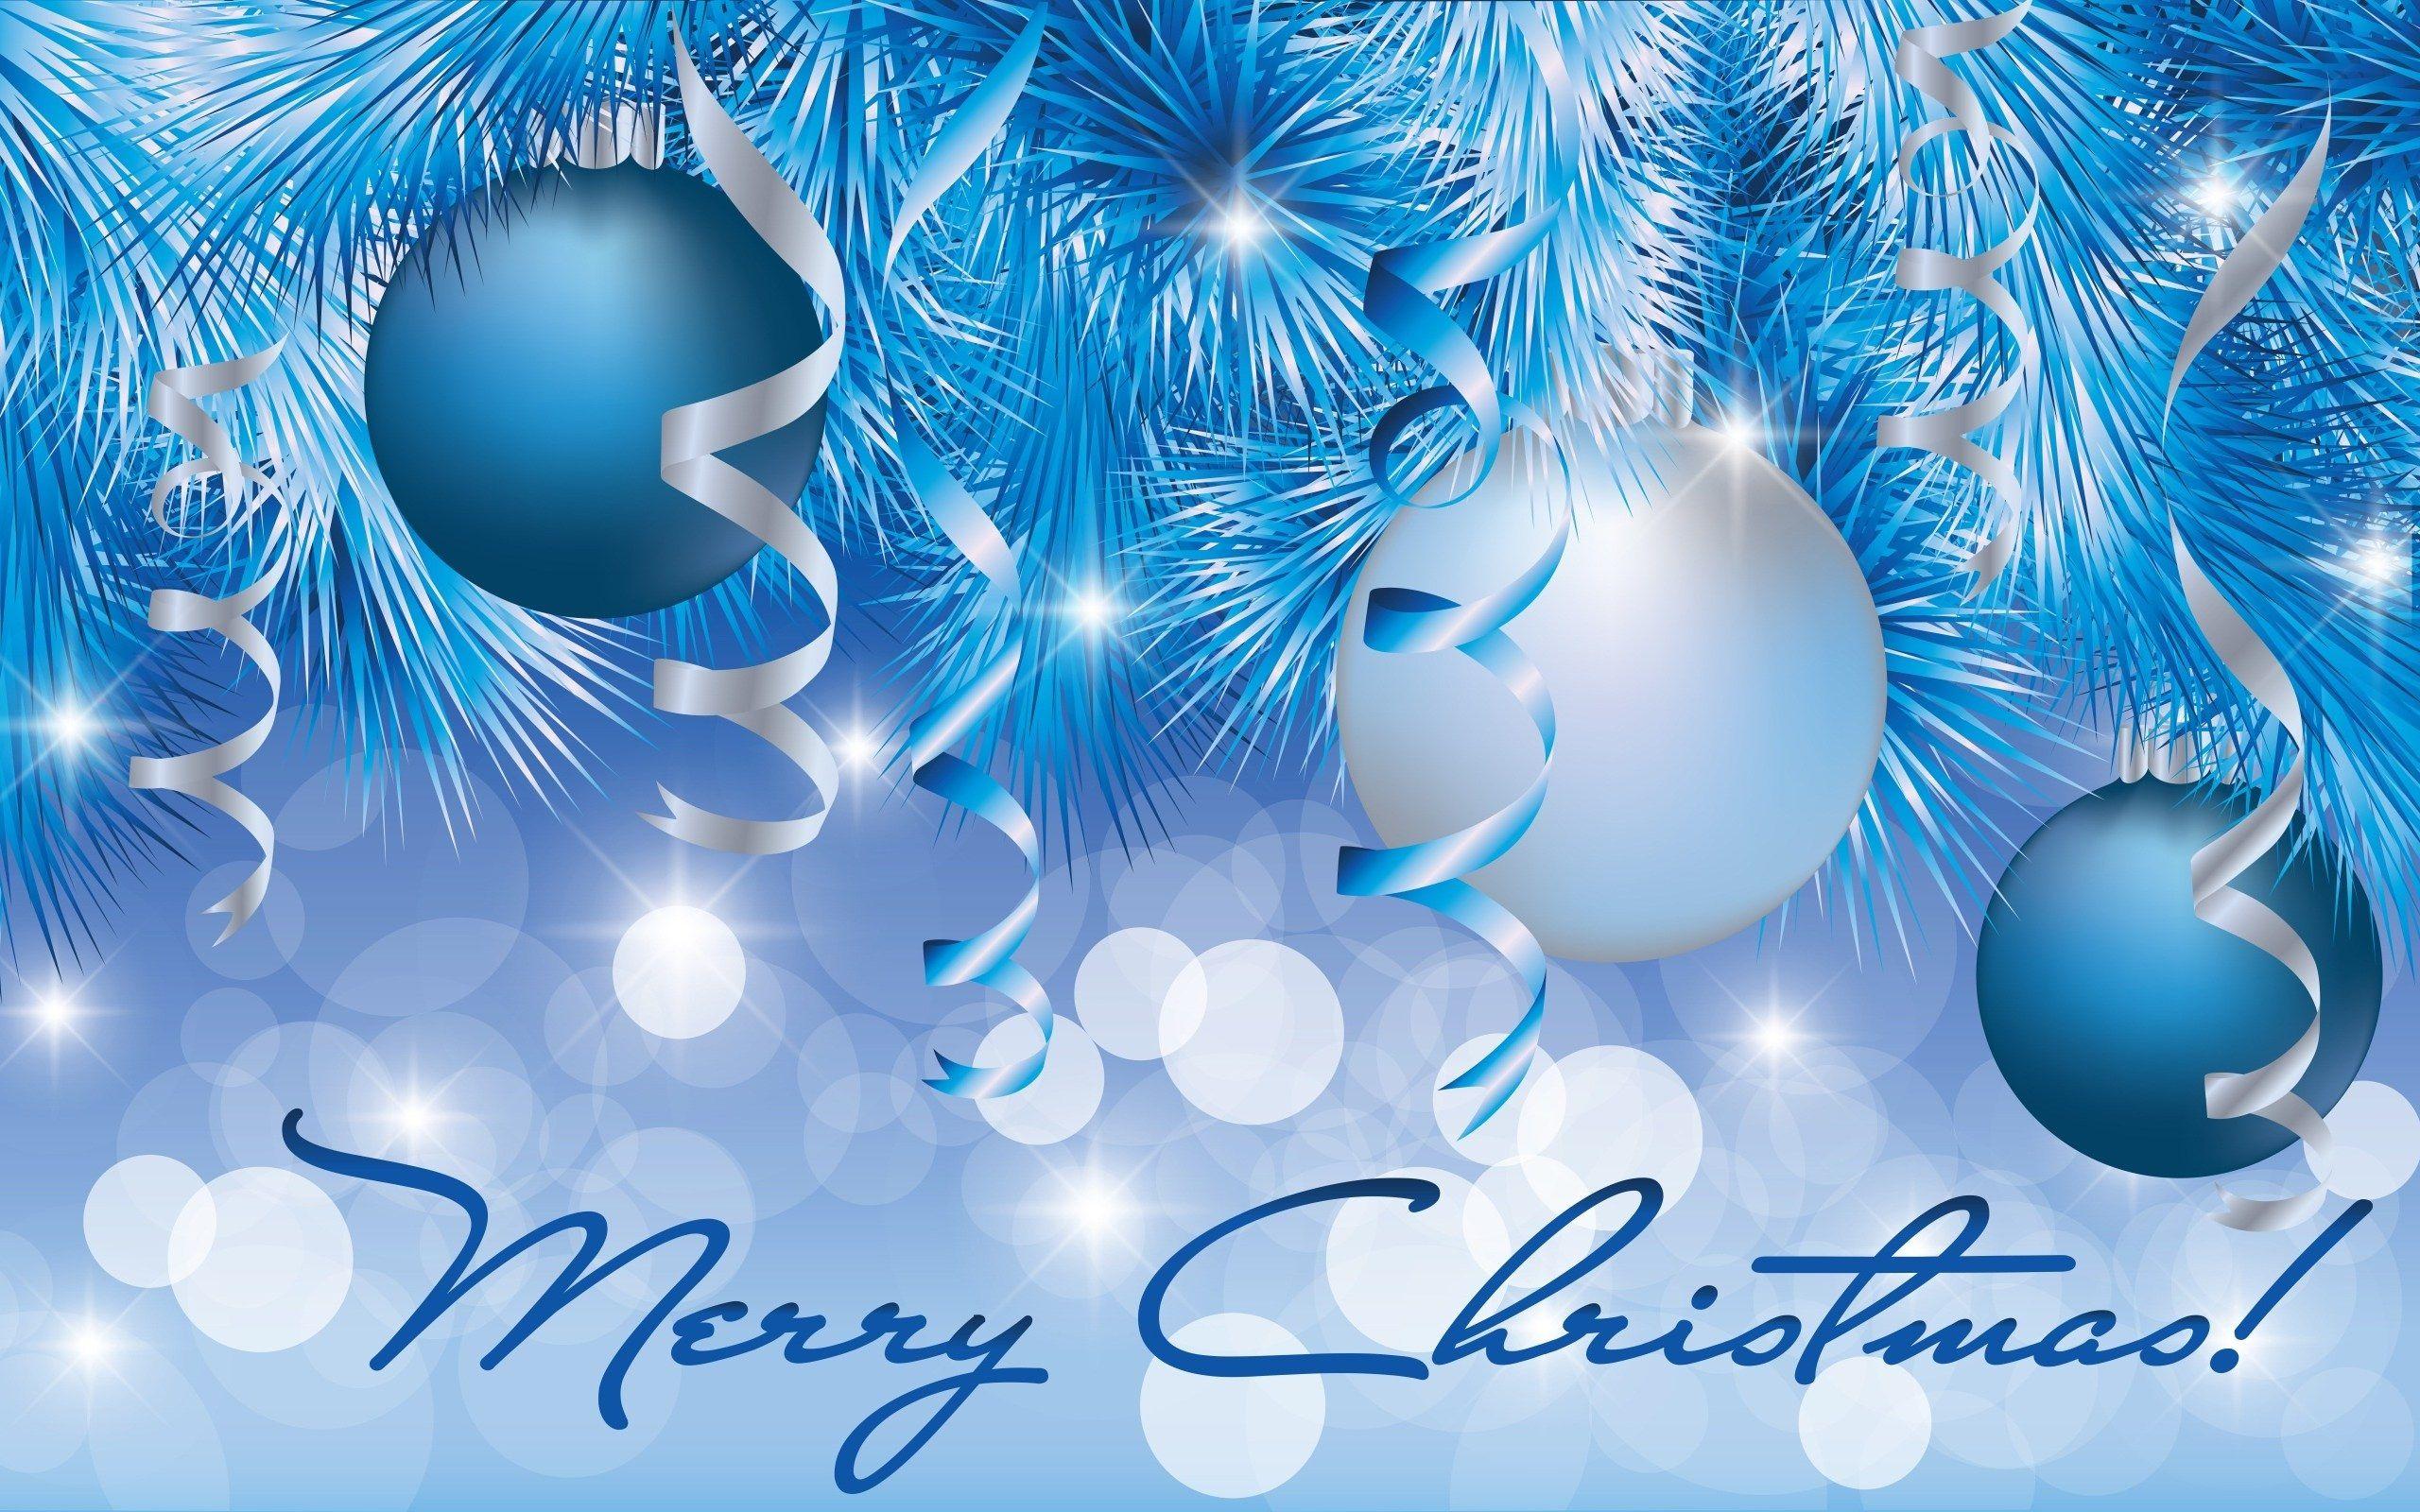 Blue And Silver Christmas wallpaper. Merry christmas wallpaper, Christmas facebook cover, Christmas wallpaper background